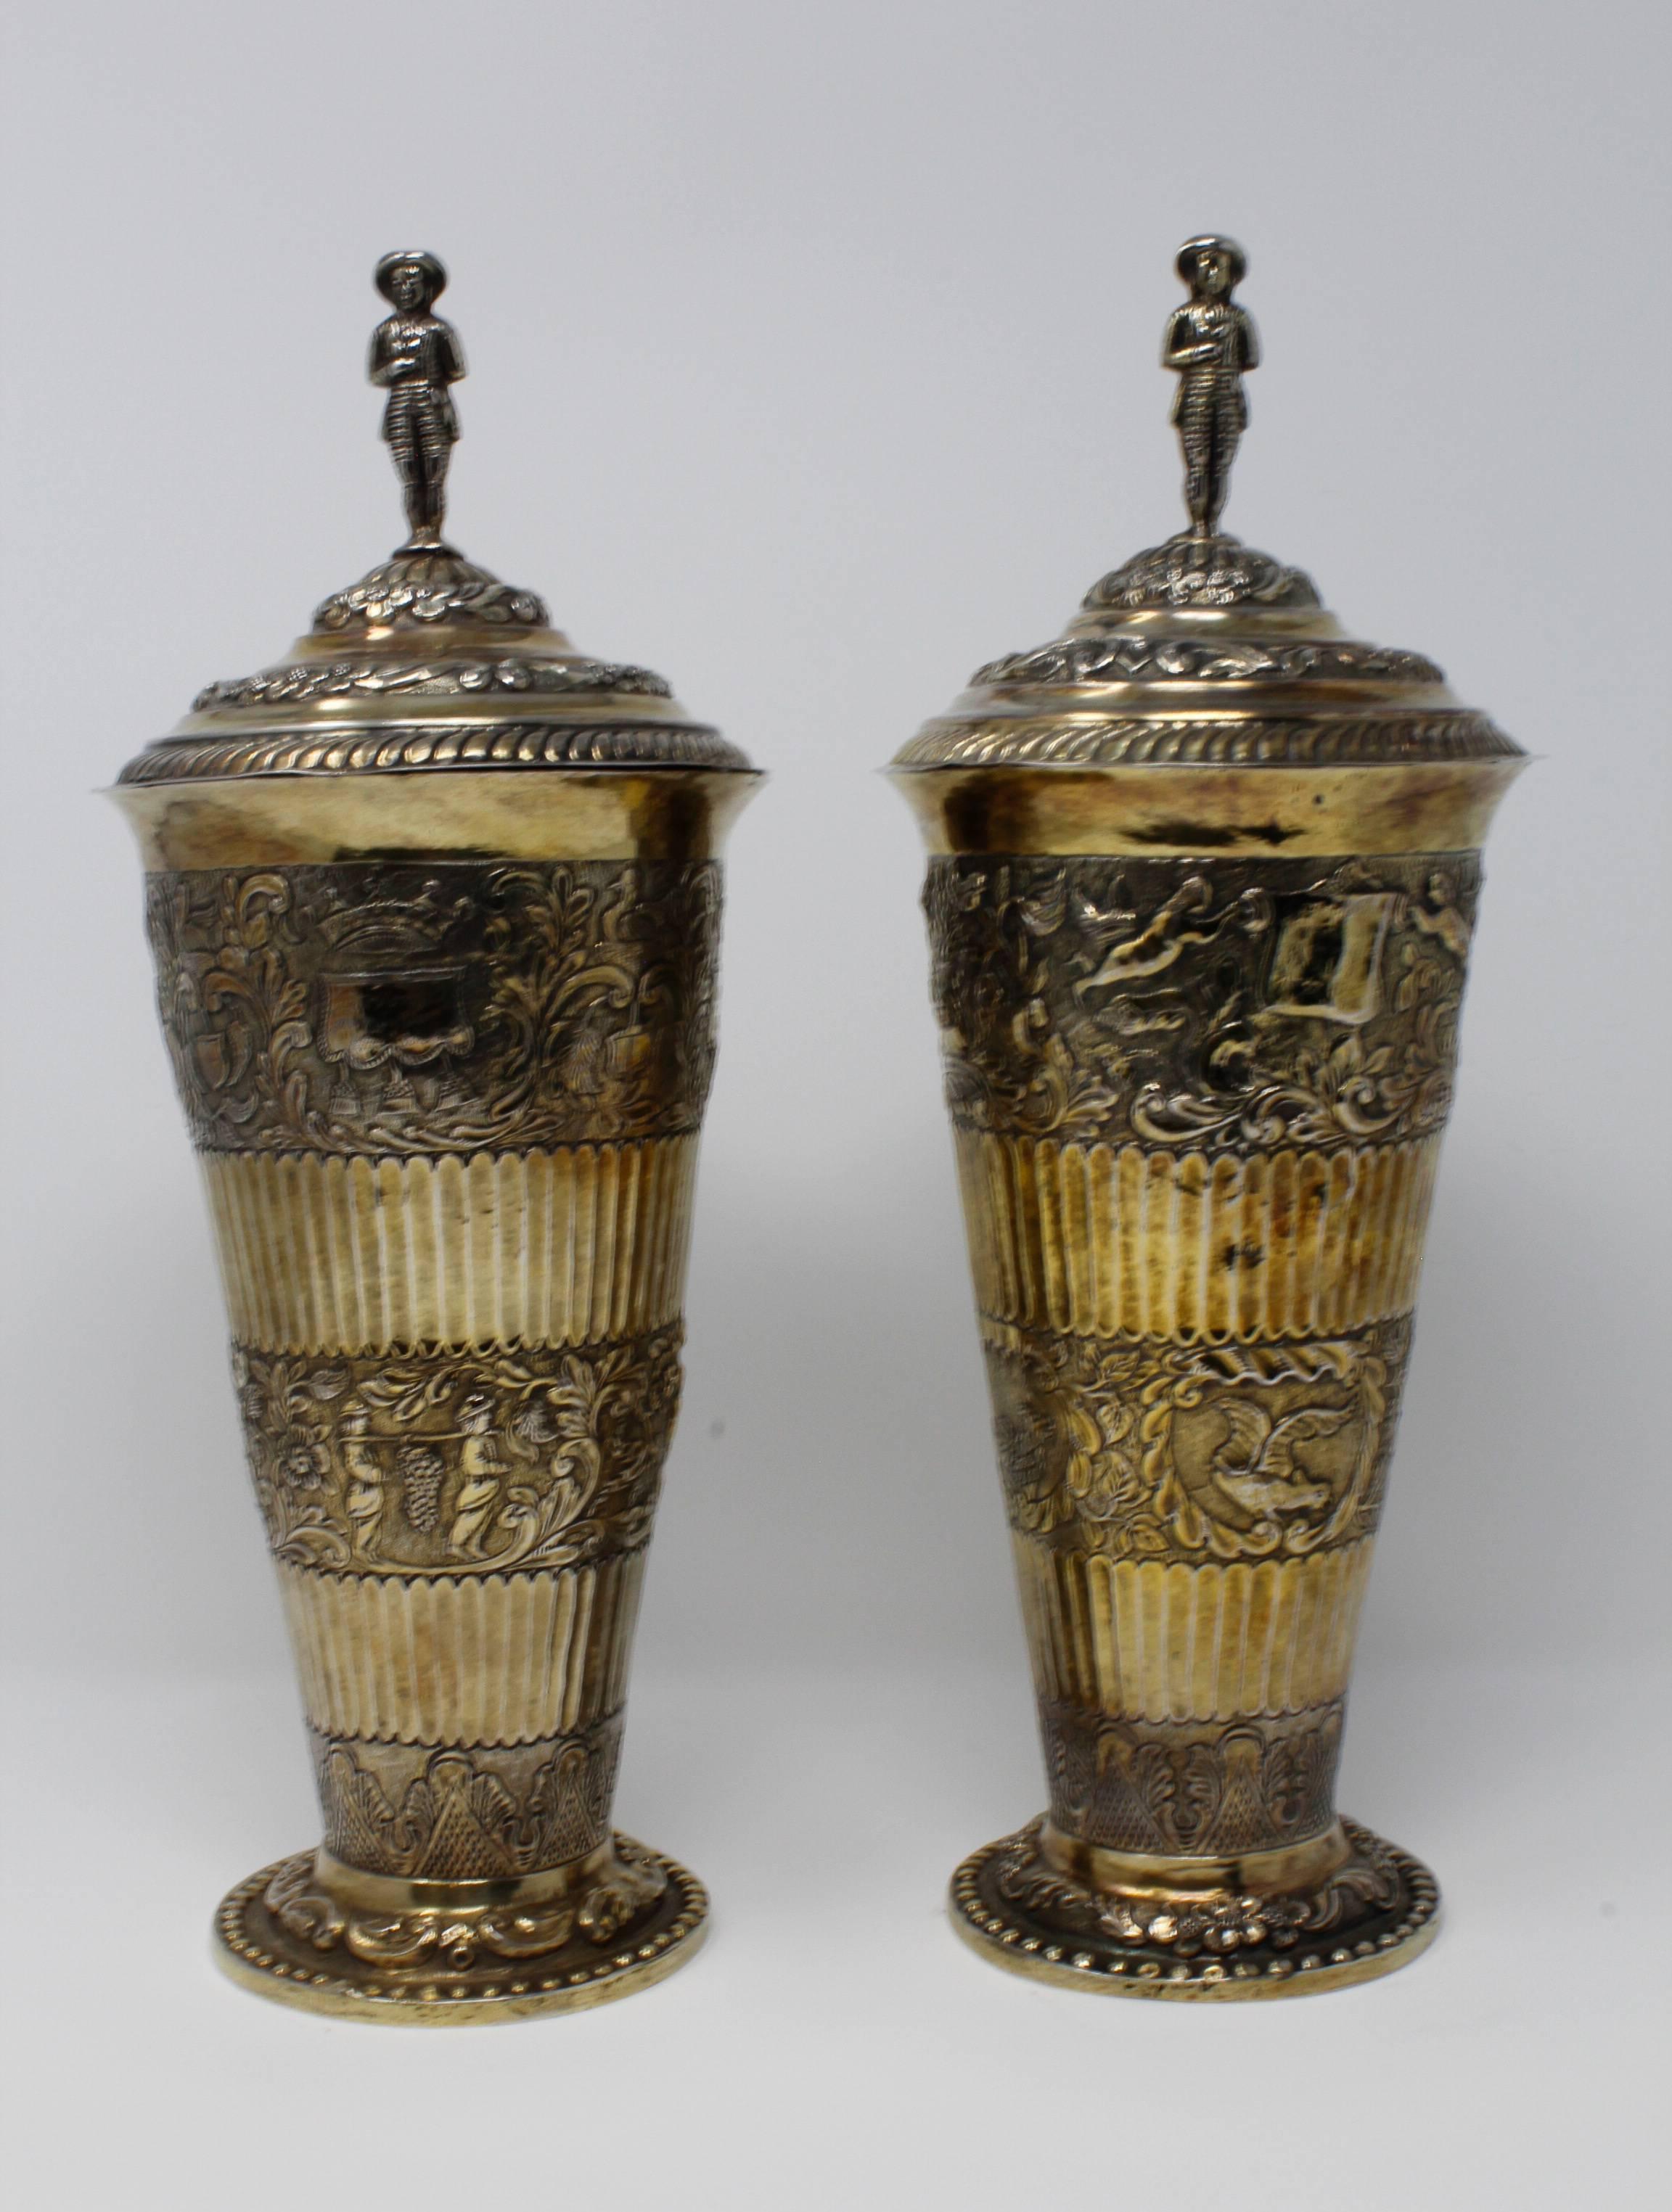 Covered Vases w/ Removable Lids, Gilt Silver, German c.1870, in 17th cent. style. Each vase depicts a different design.  Both vases weigh a total of 67 Troy oz.